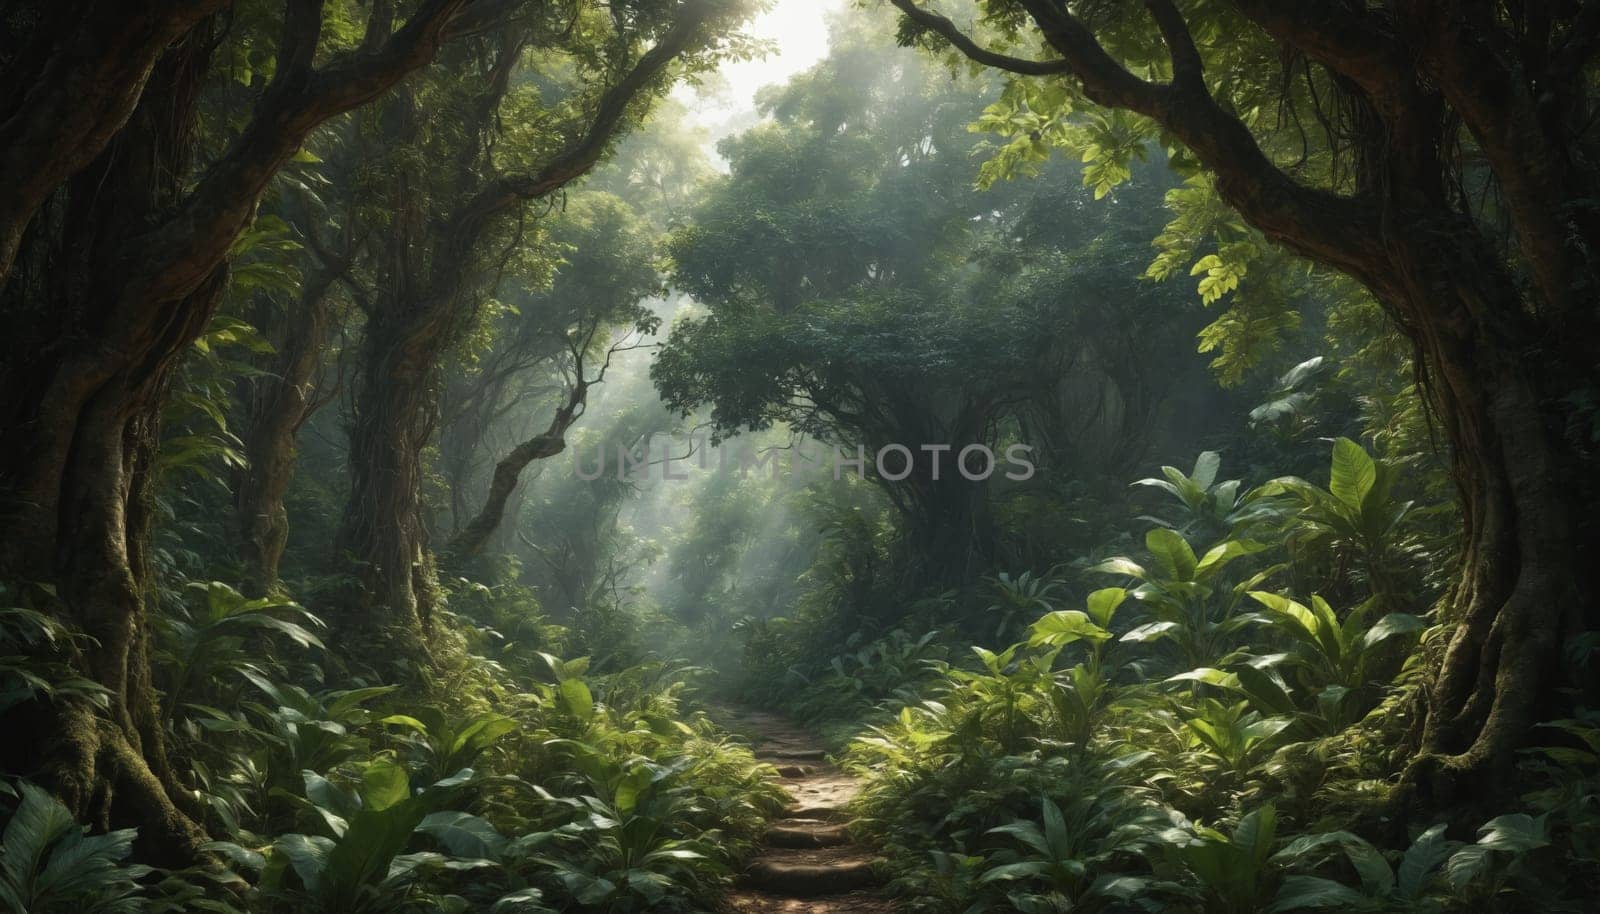 A sunbeam pierces through the dense foliage of a tropical rainforest, illuminating a path that winds its way through the dense undergrowth. Lush greenery fills the scene, creating a sense of mystery and adventure.